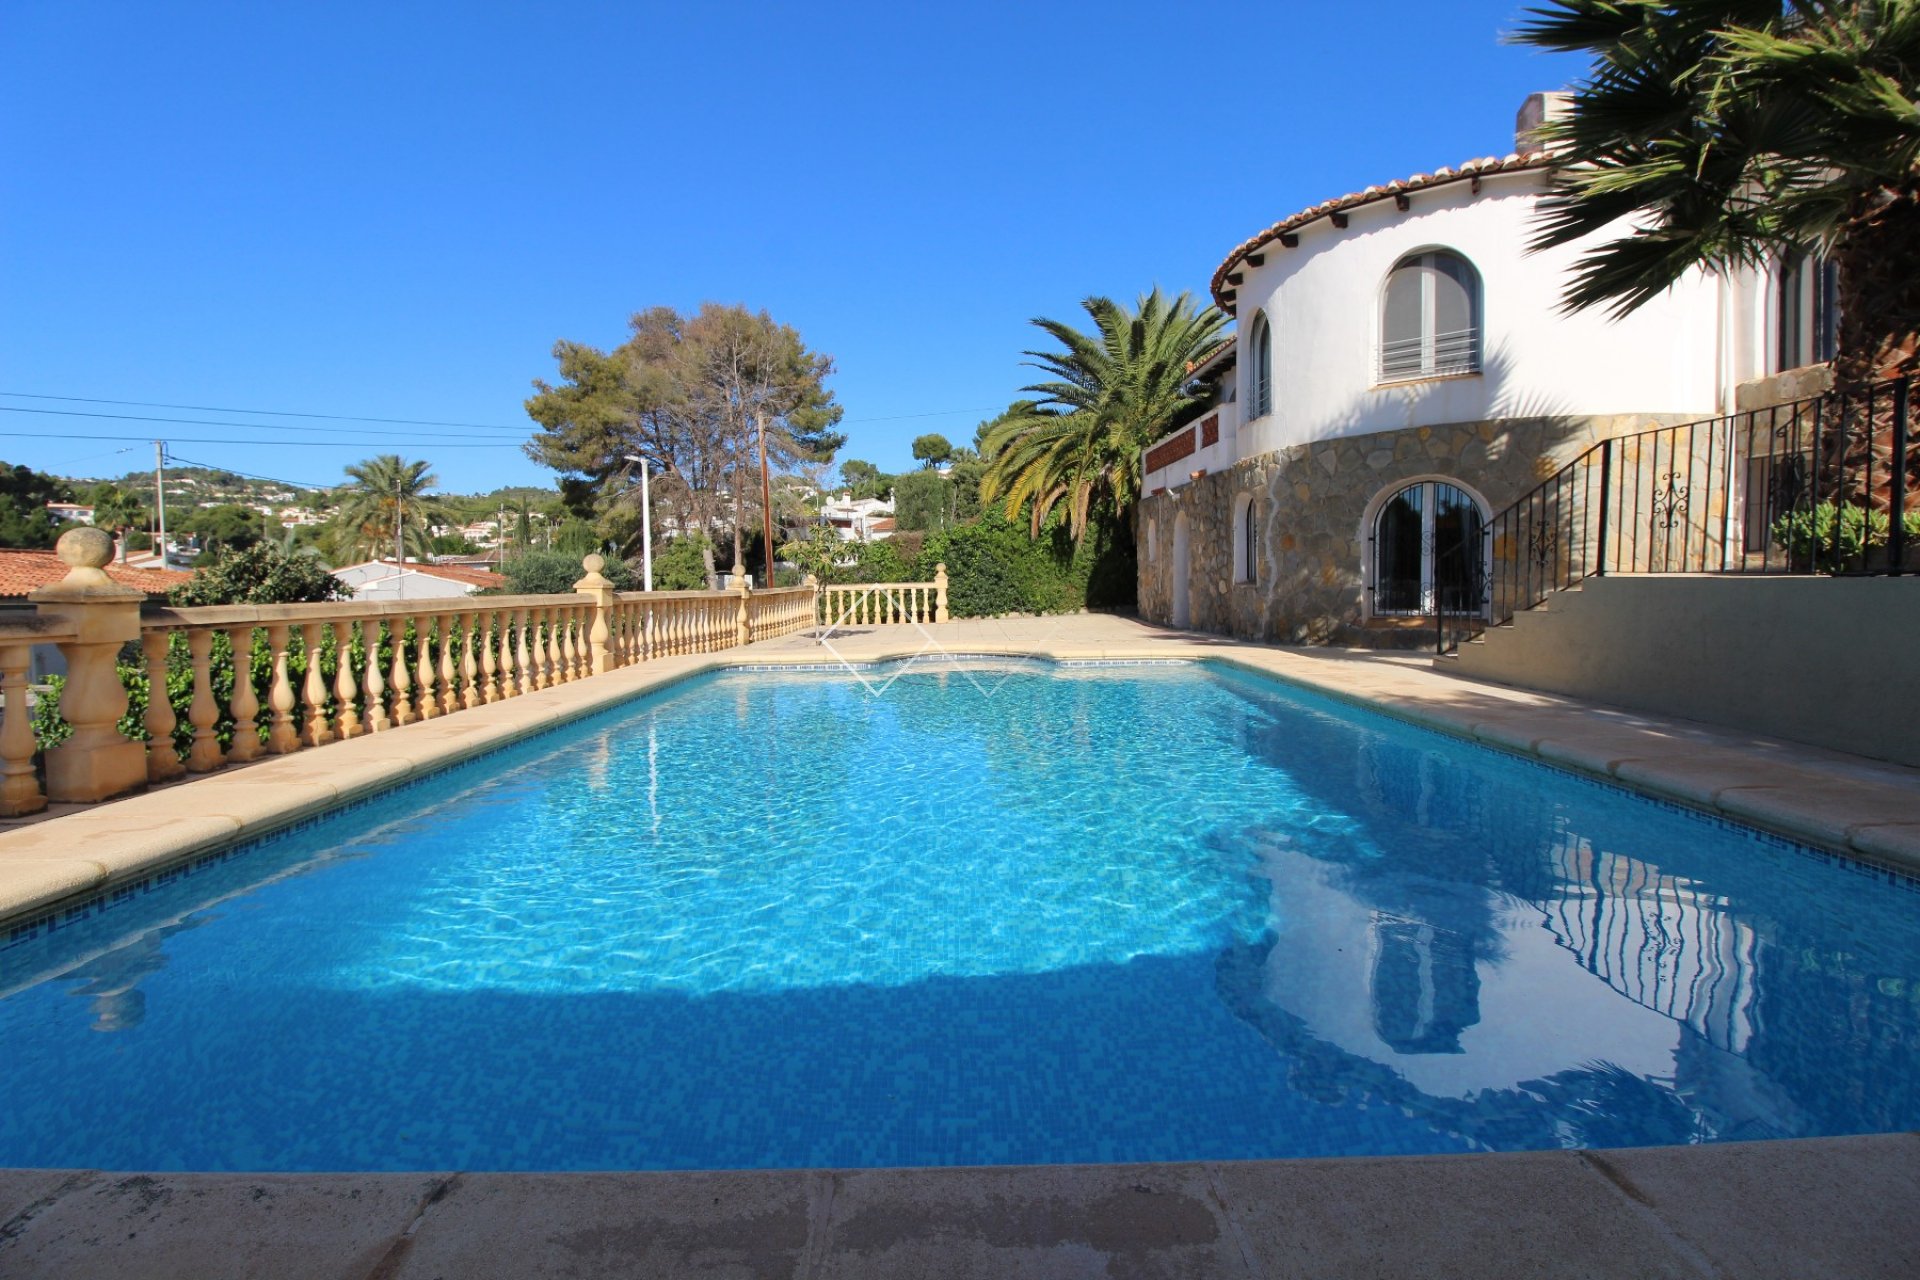 pool - Renovated villa for sale in Benissa, 400m from beach